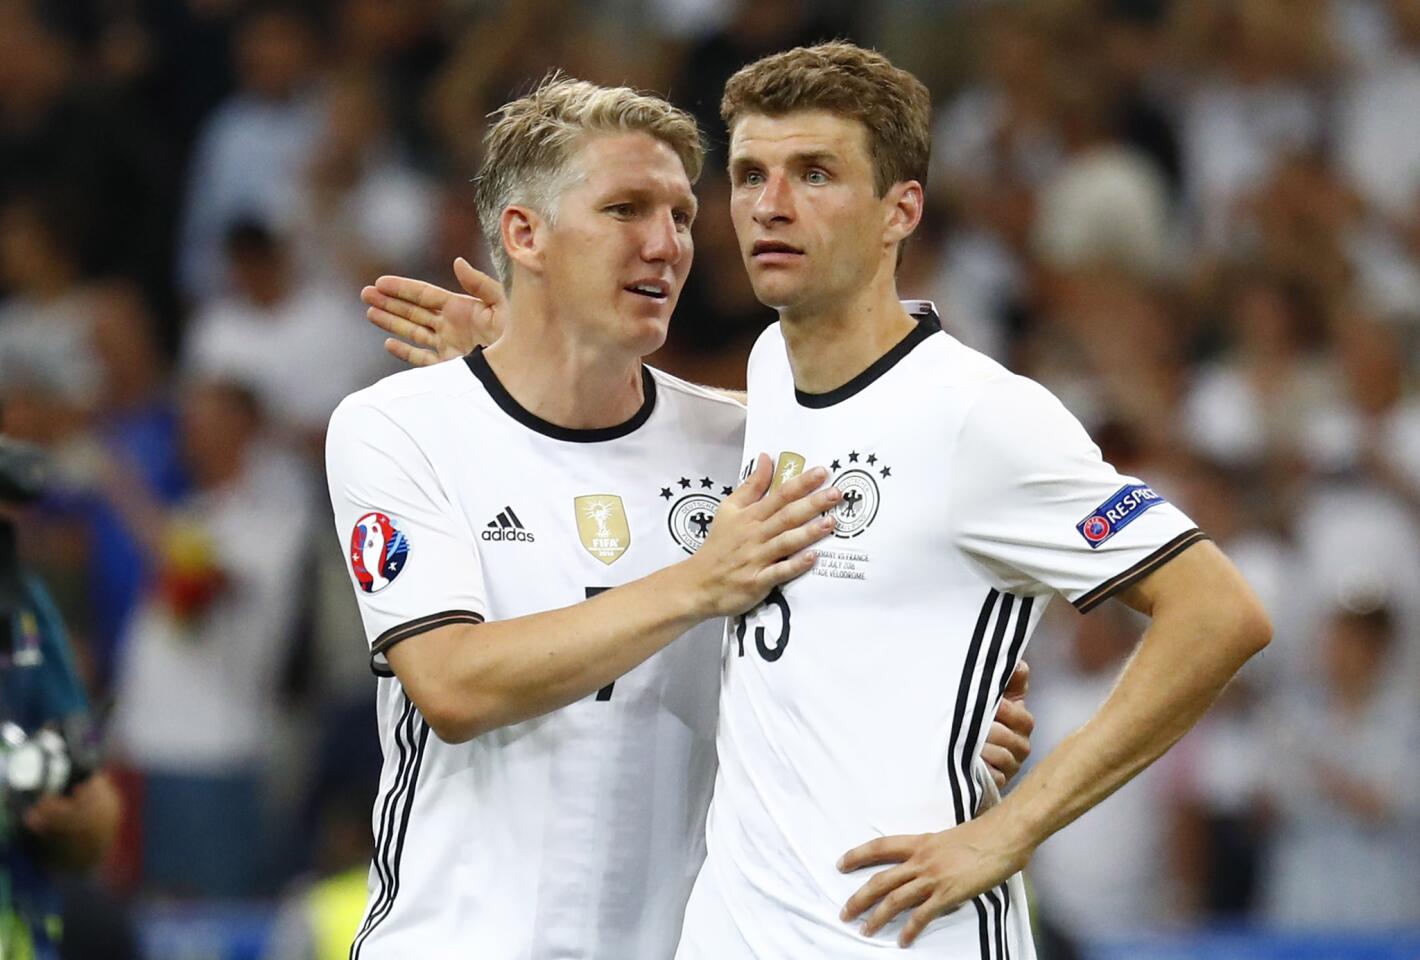 Football Soccer - Germany v France - EURO 2016 - Semi Final - Stade Velodrome, Marseille, France - 7/7/16 Germany's Bastian Schweinsteiger and Thomas Muller react the end of the match REUTERS/Michael Dalder Livepic ** Usable by SD ONLY **